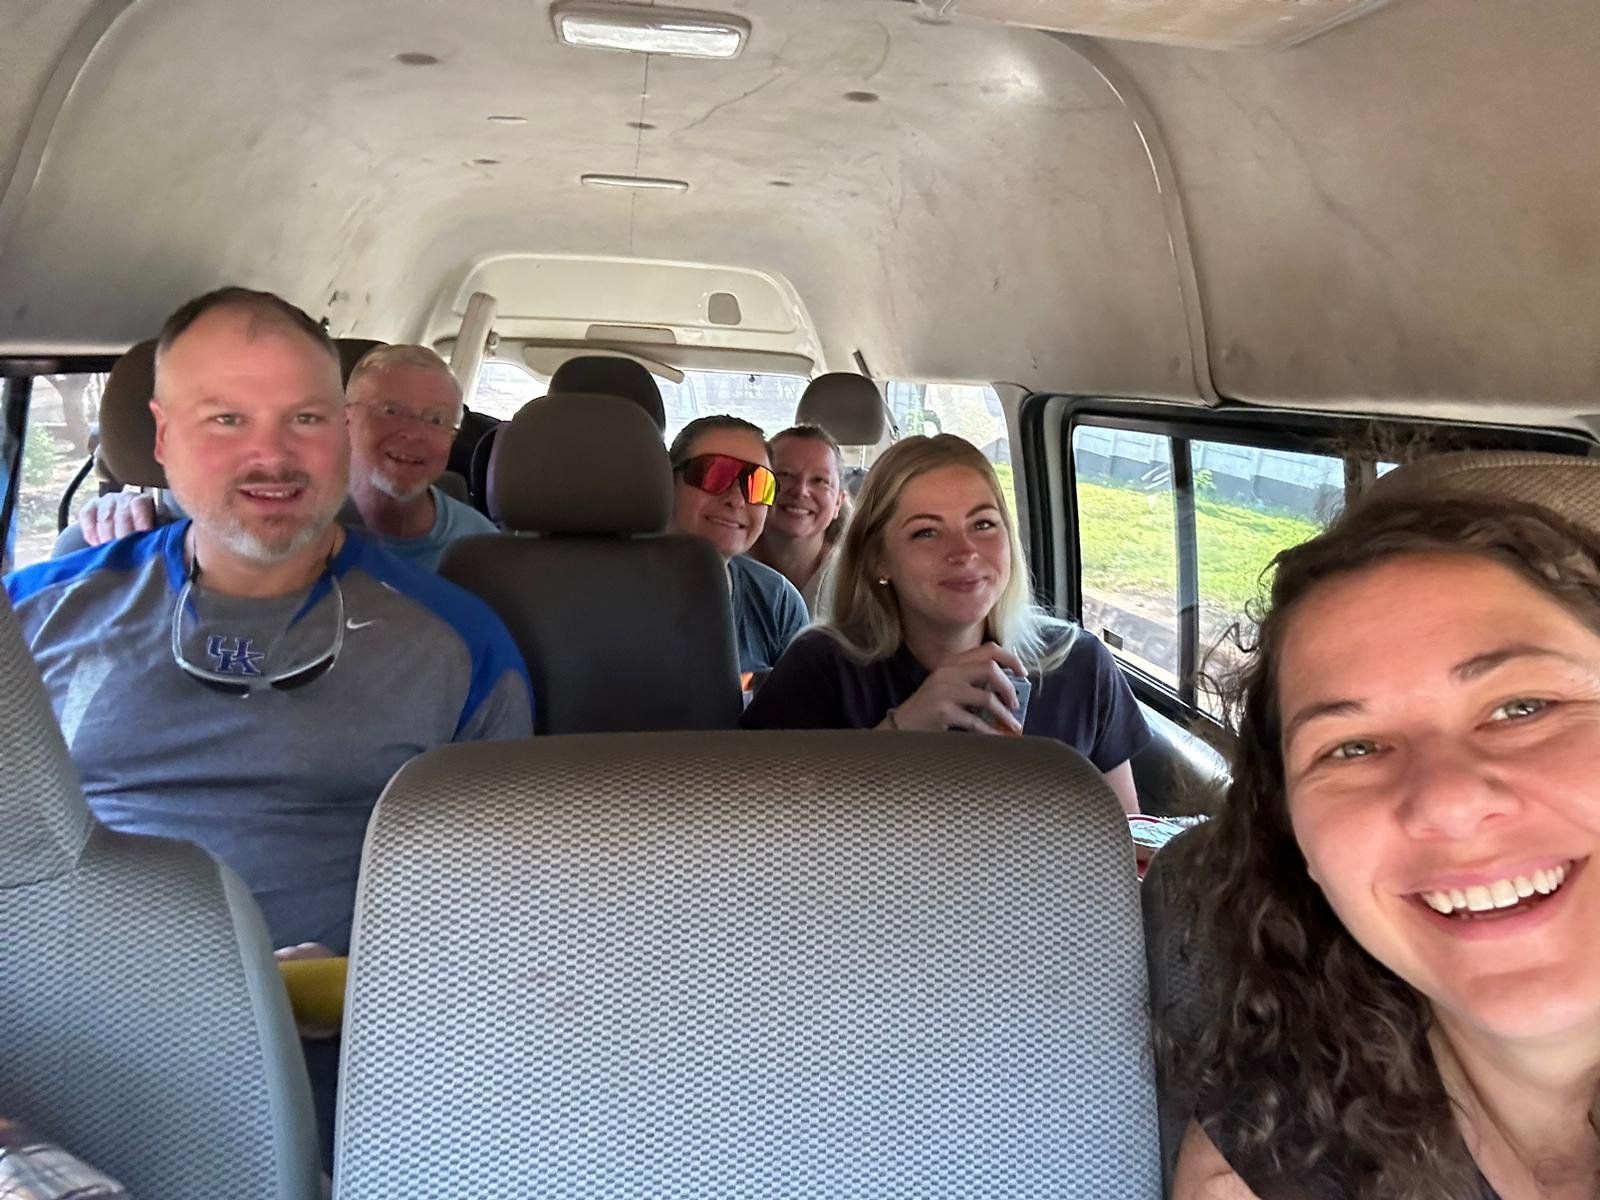 Ari, second from right, in the van on the way to Day 1 at Mitundu!